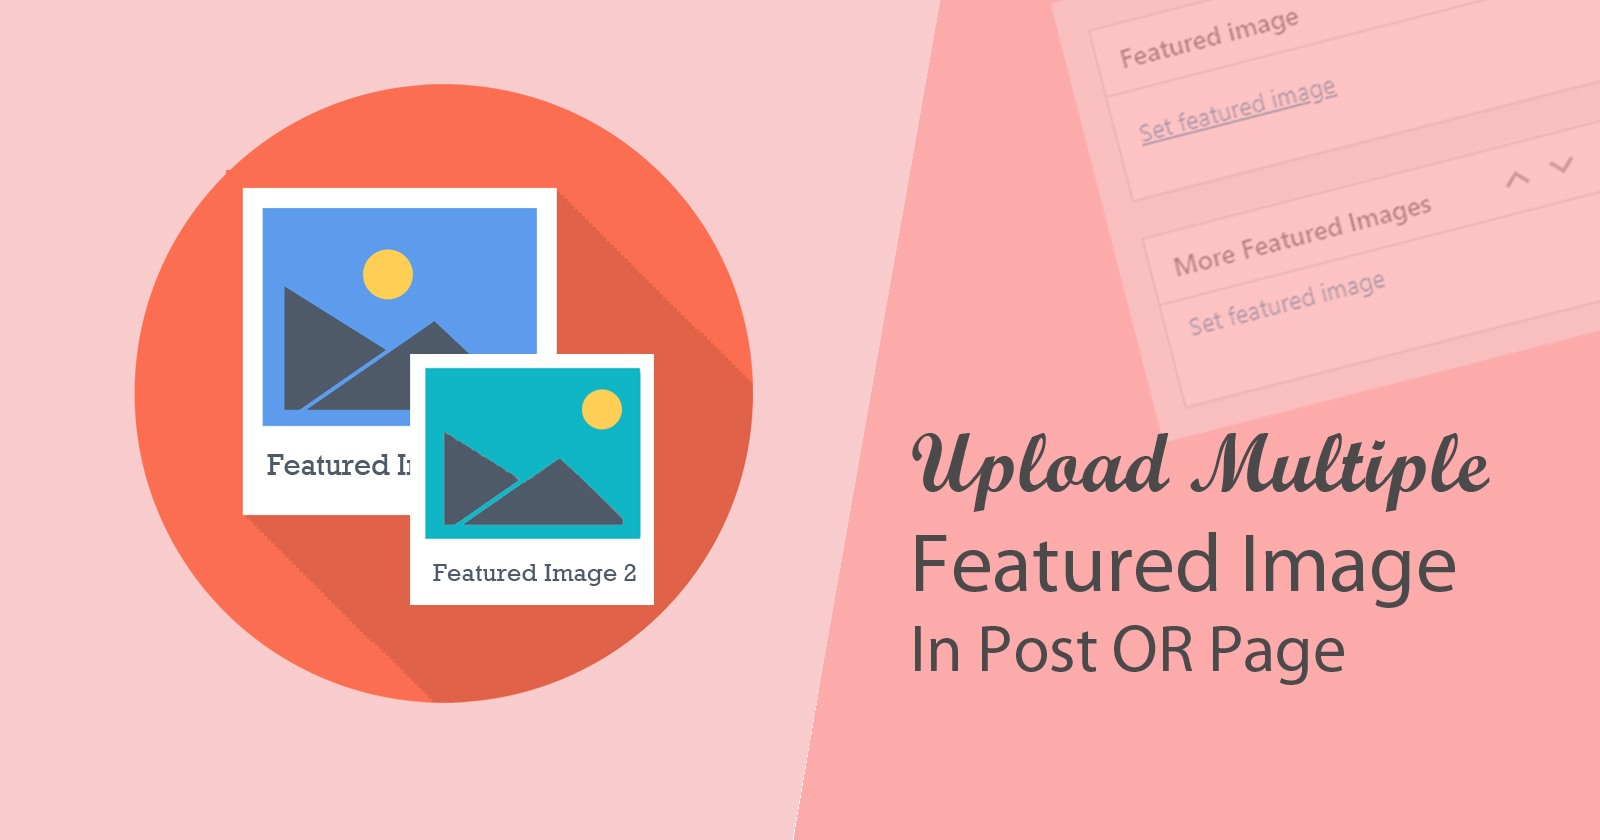 Upload multiple featured images in a post OR page (Wordpress)